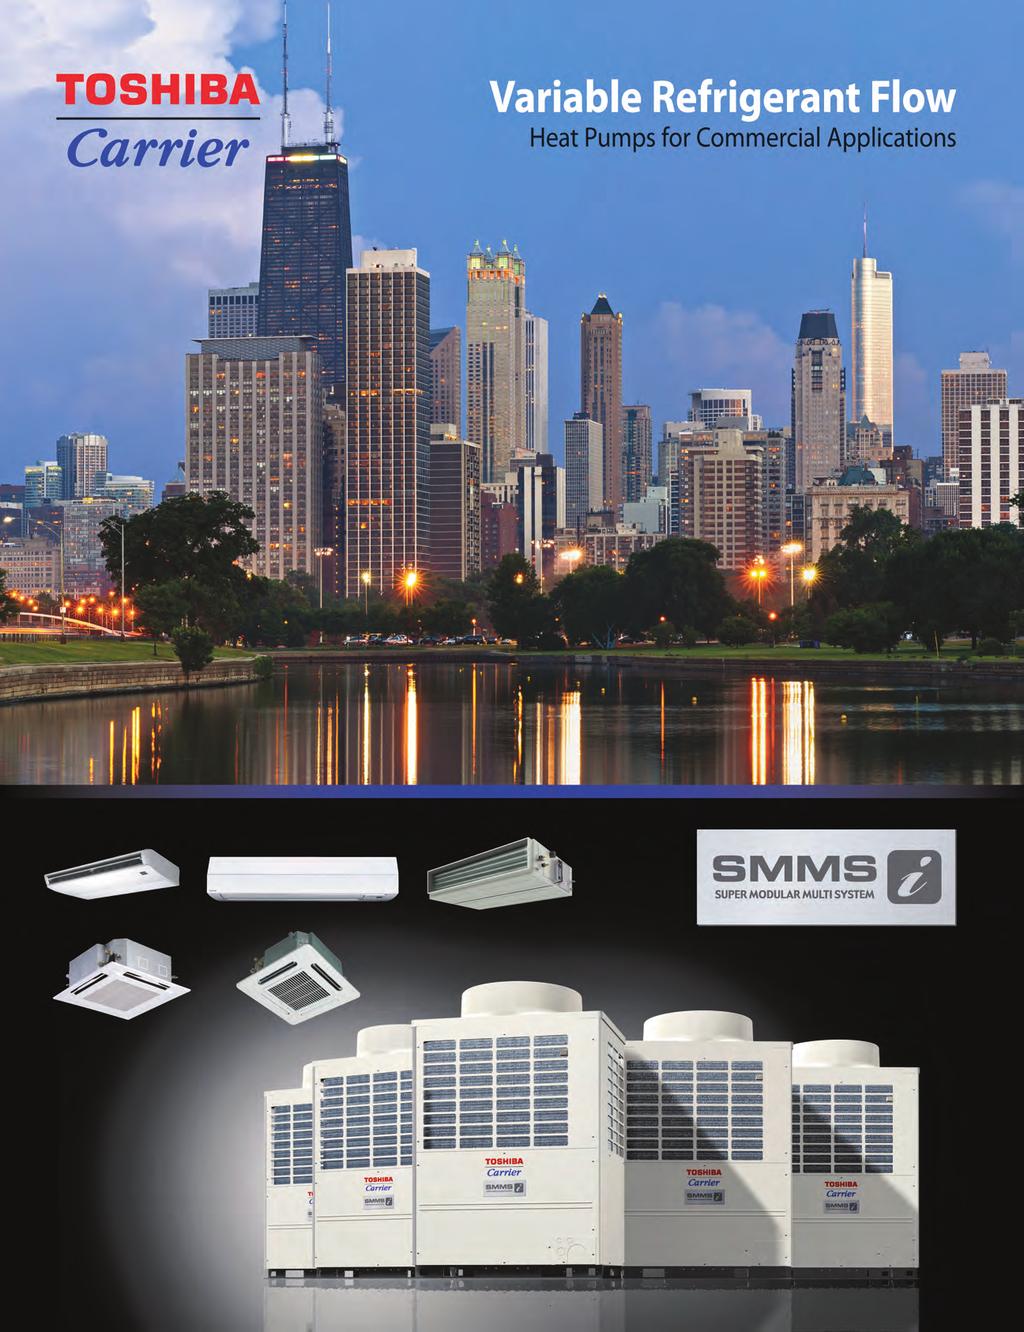 Toshiba Carrier offers both ductless and ducted comfort solutions for all applications: residential, light commercial and larger commercial buildings.